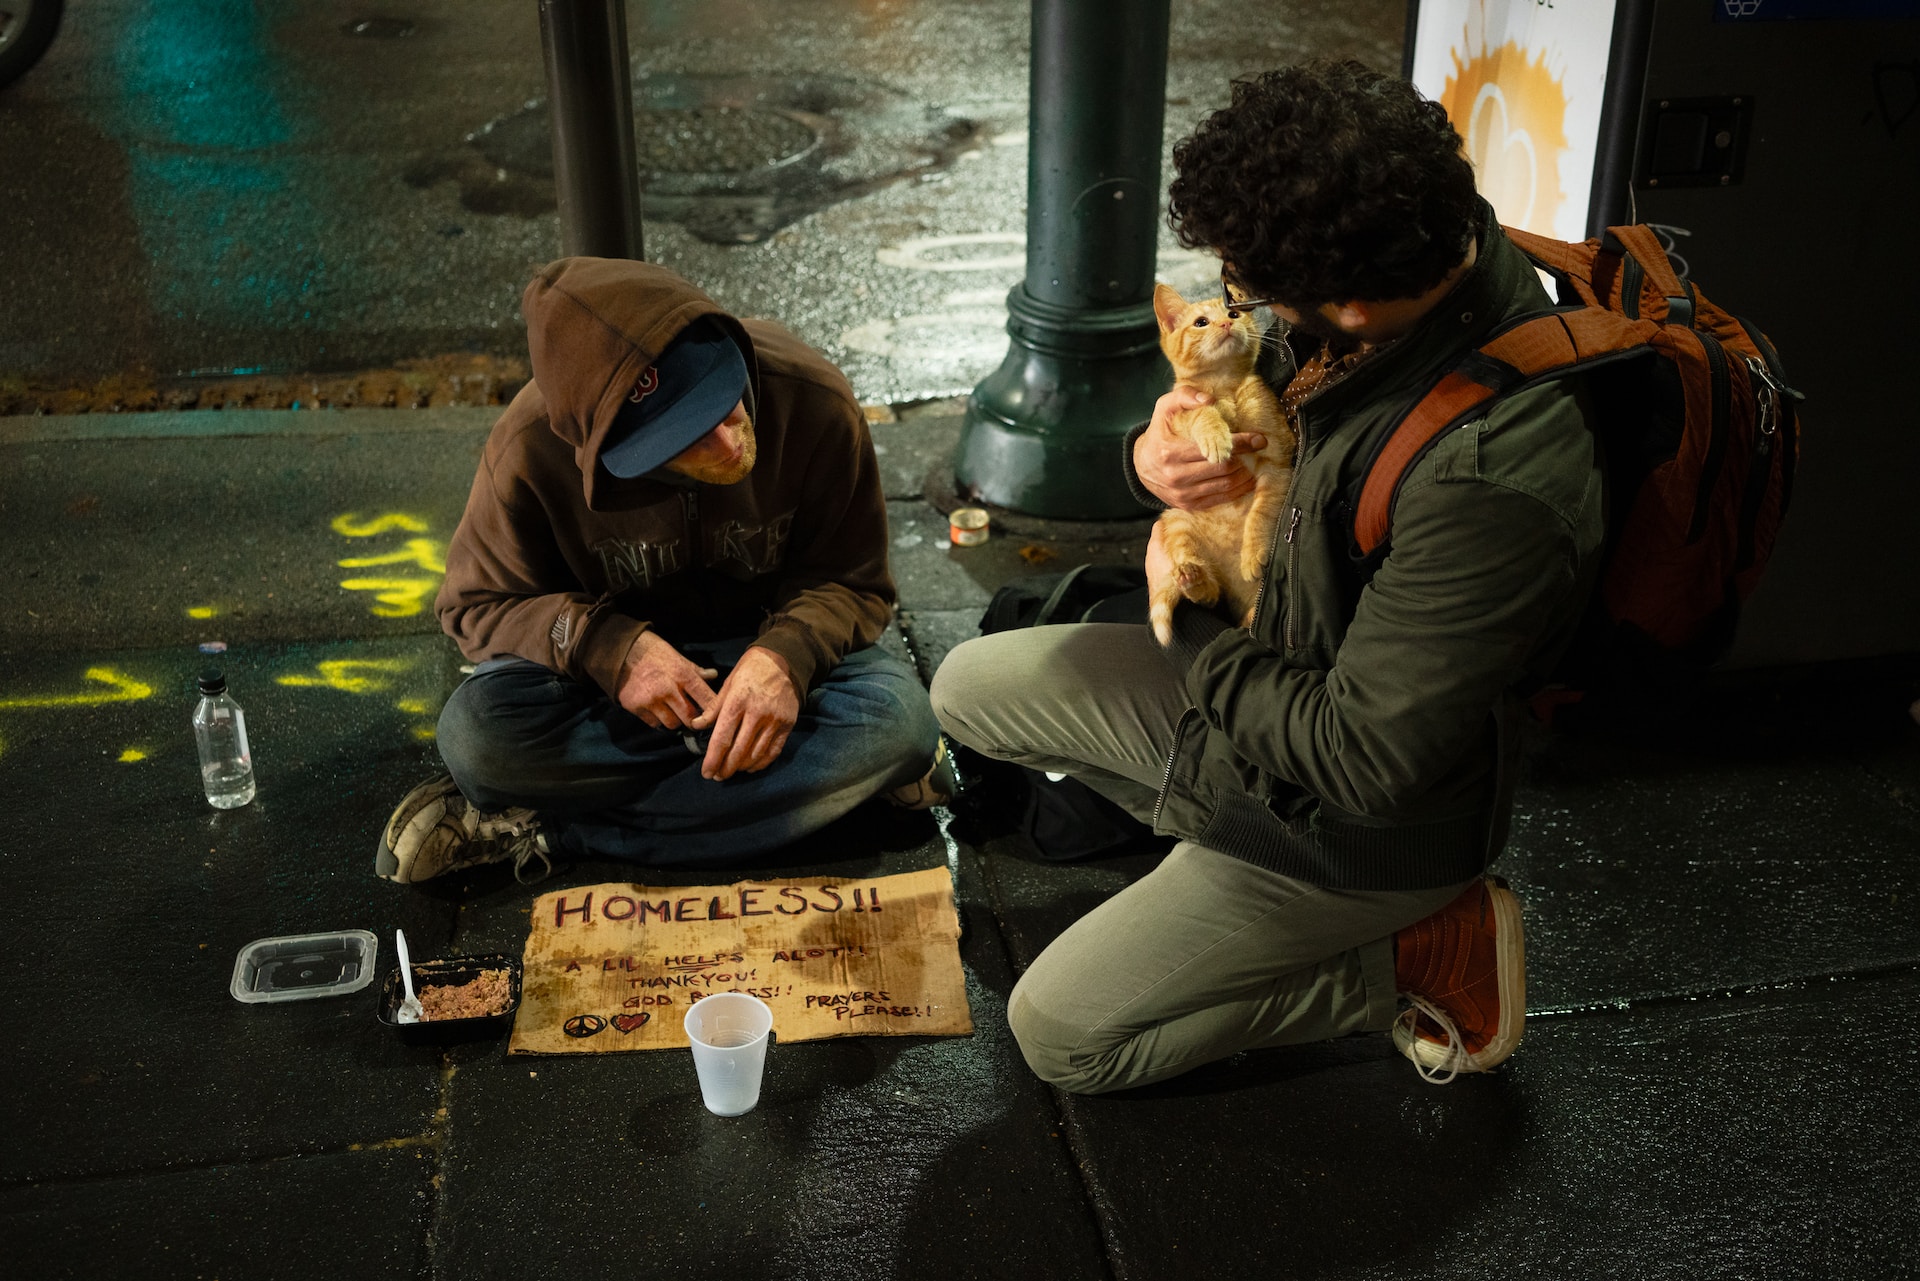 Man begging with a cat